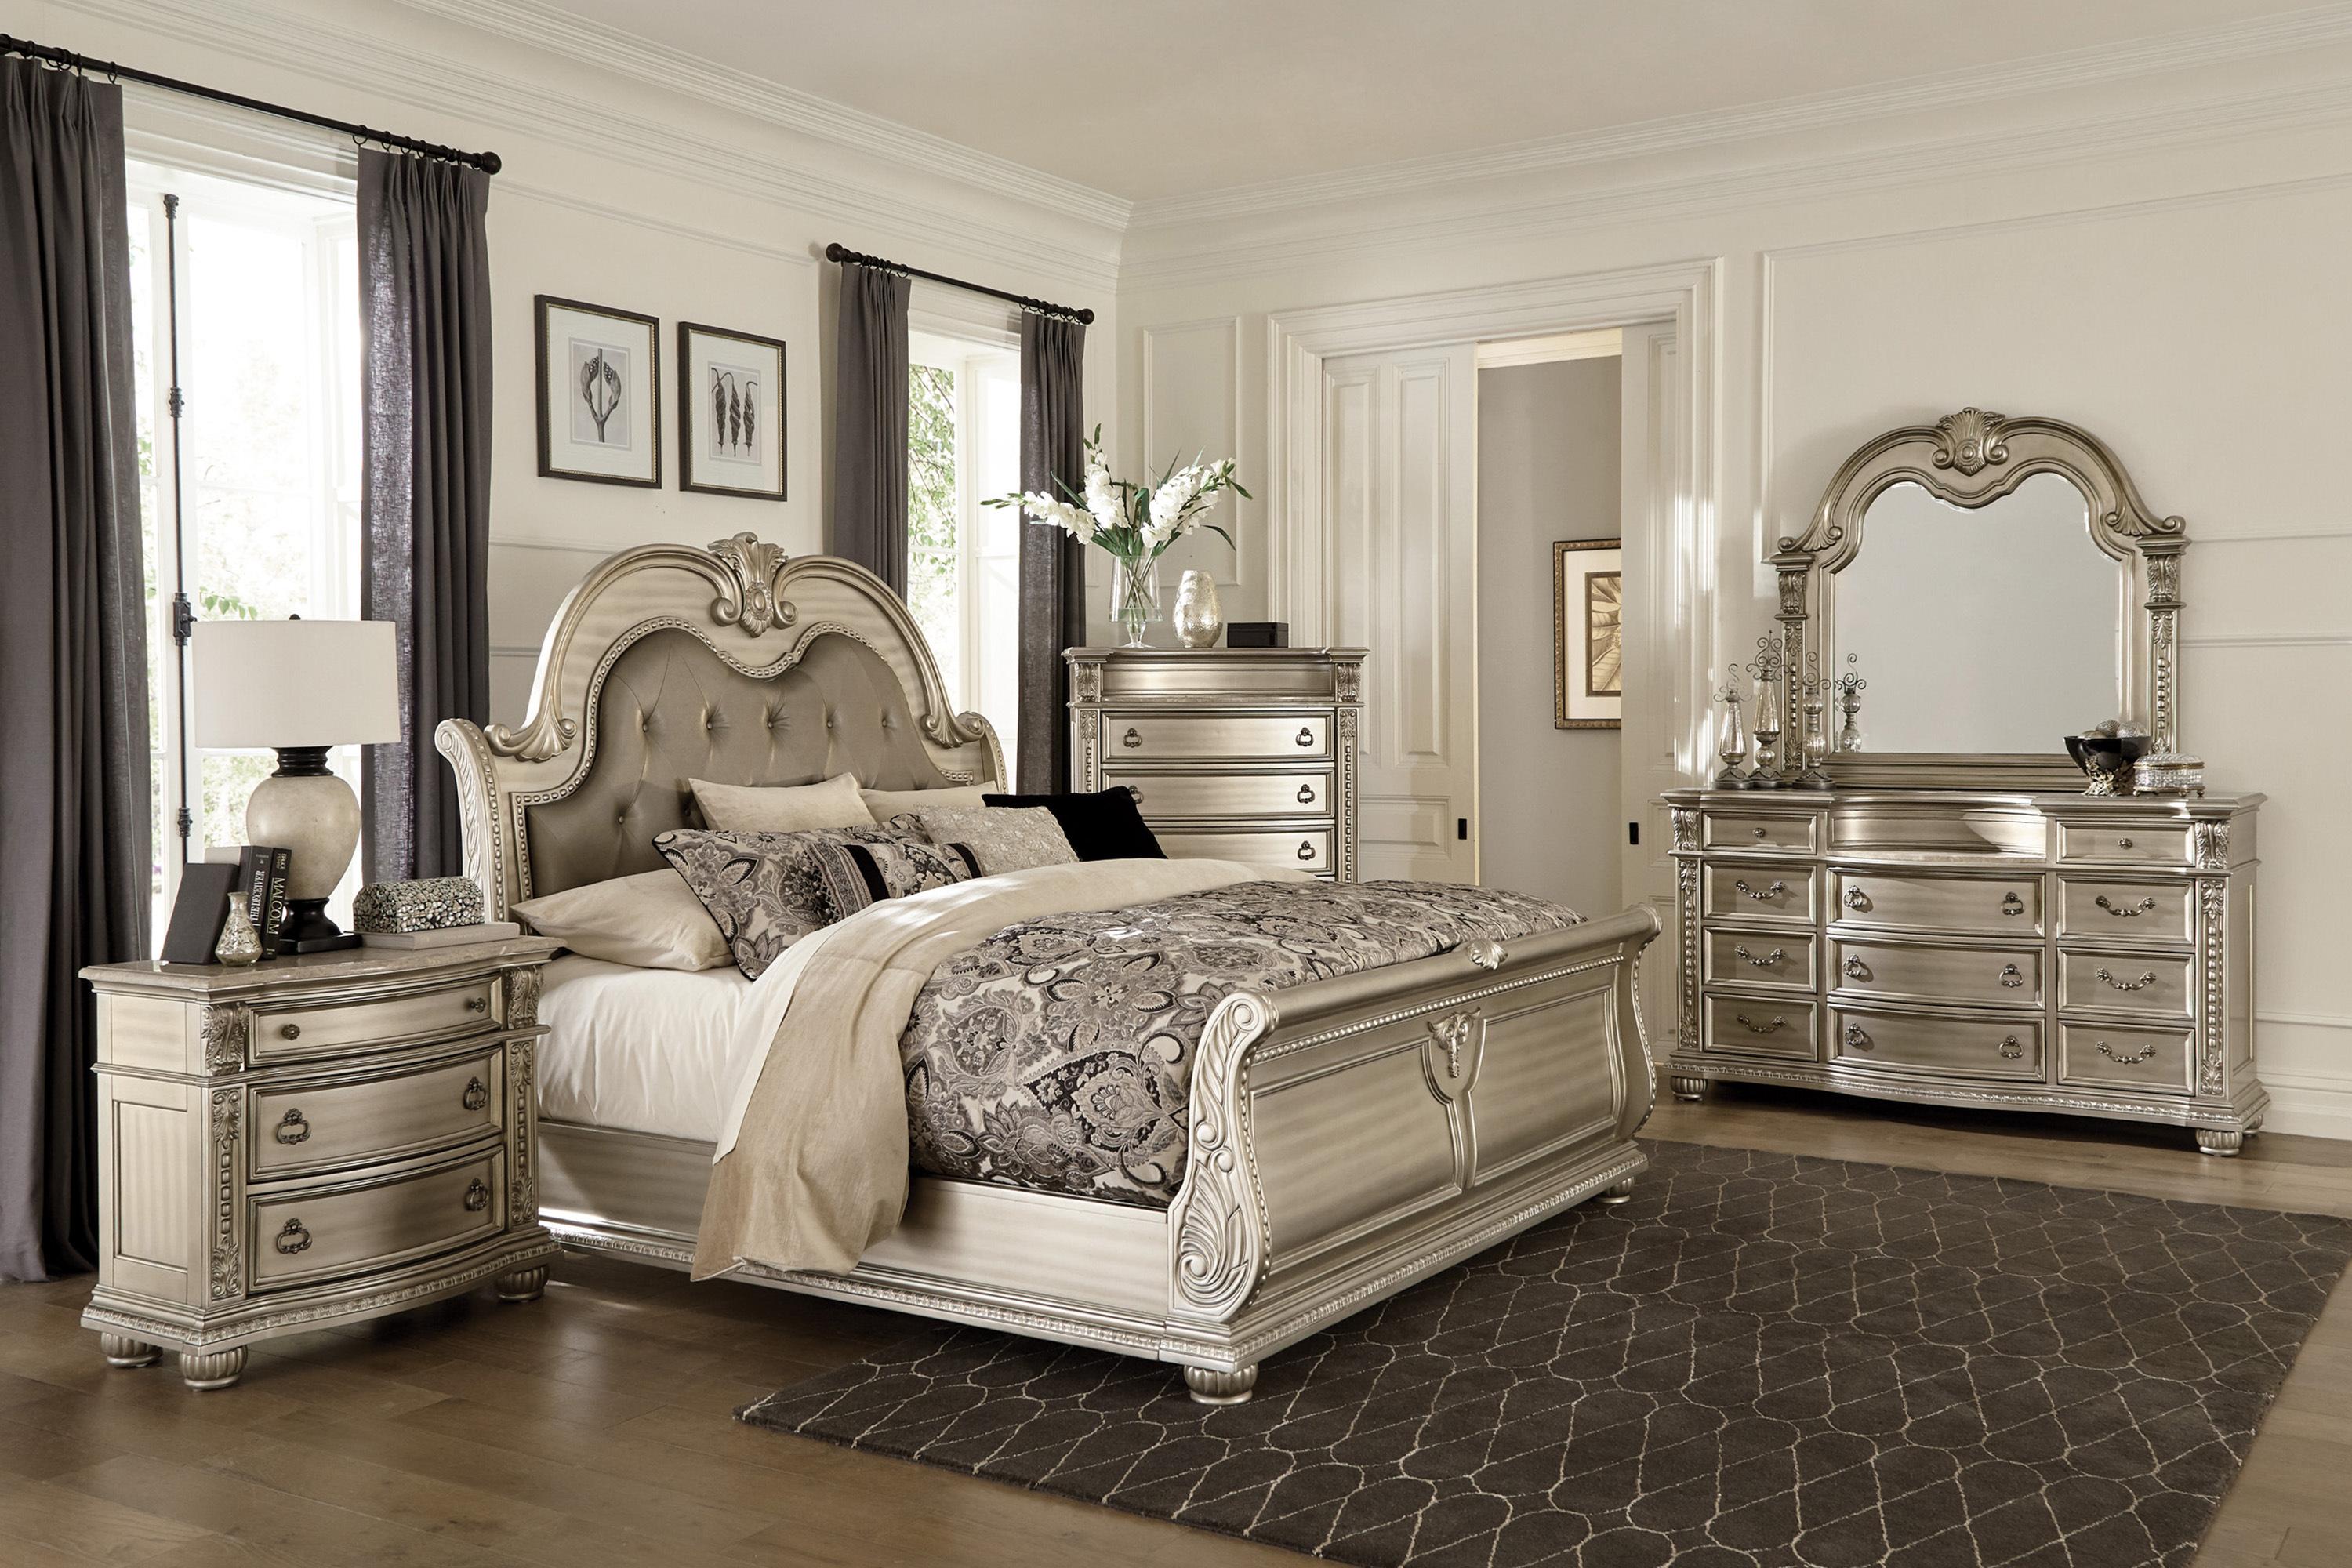 Classic Bedroom Set 1757SVK-1CK-5PC Cavalier 1757SVK-1CK-5PC in Silver Faux Leather